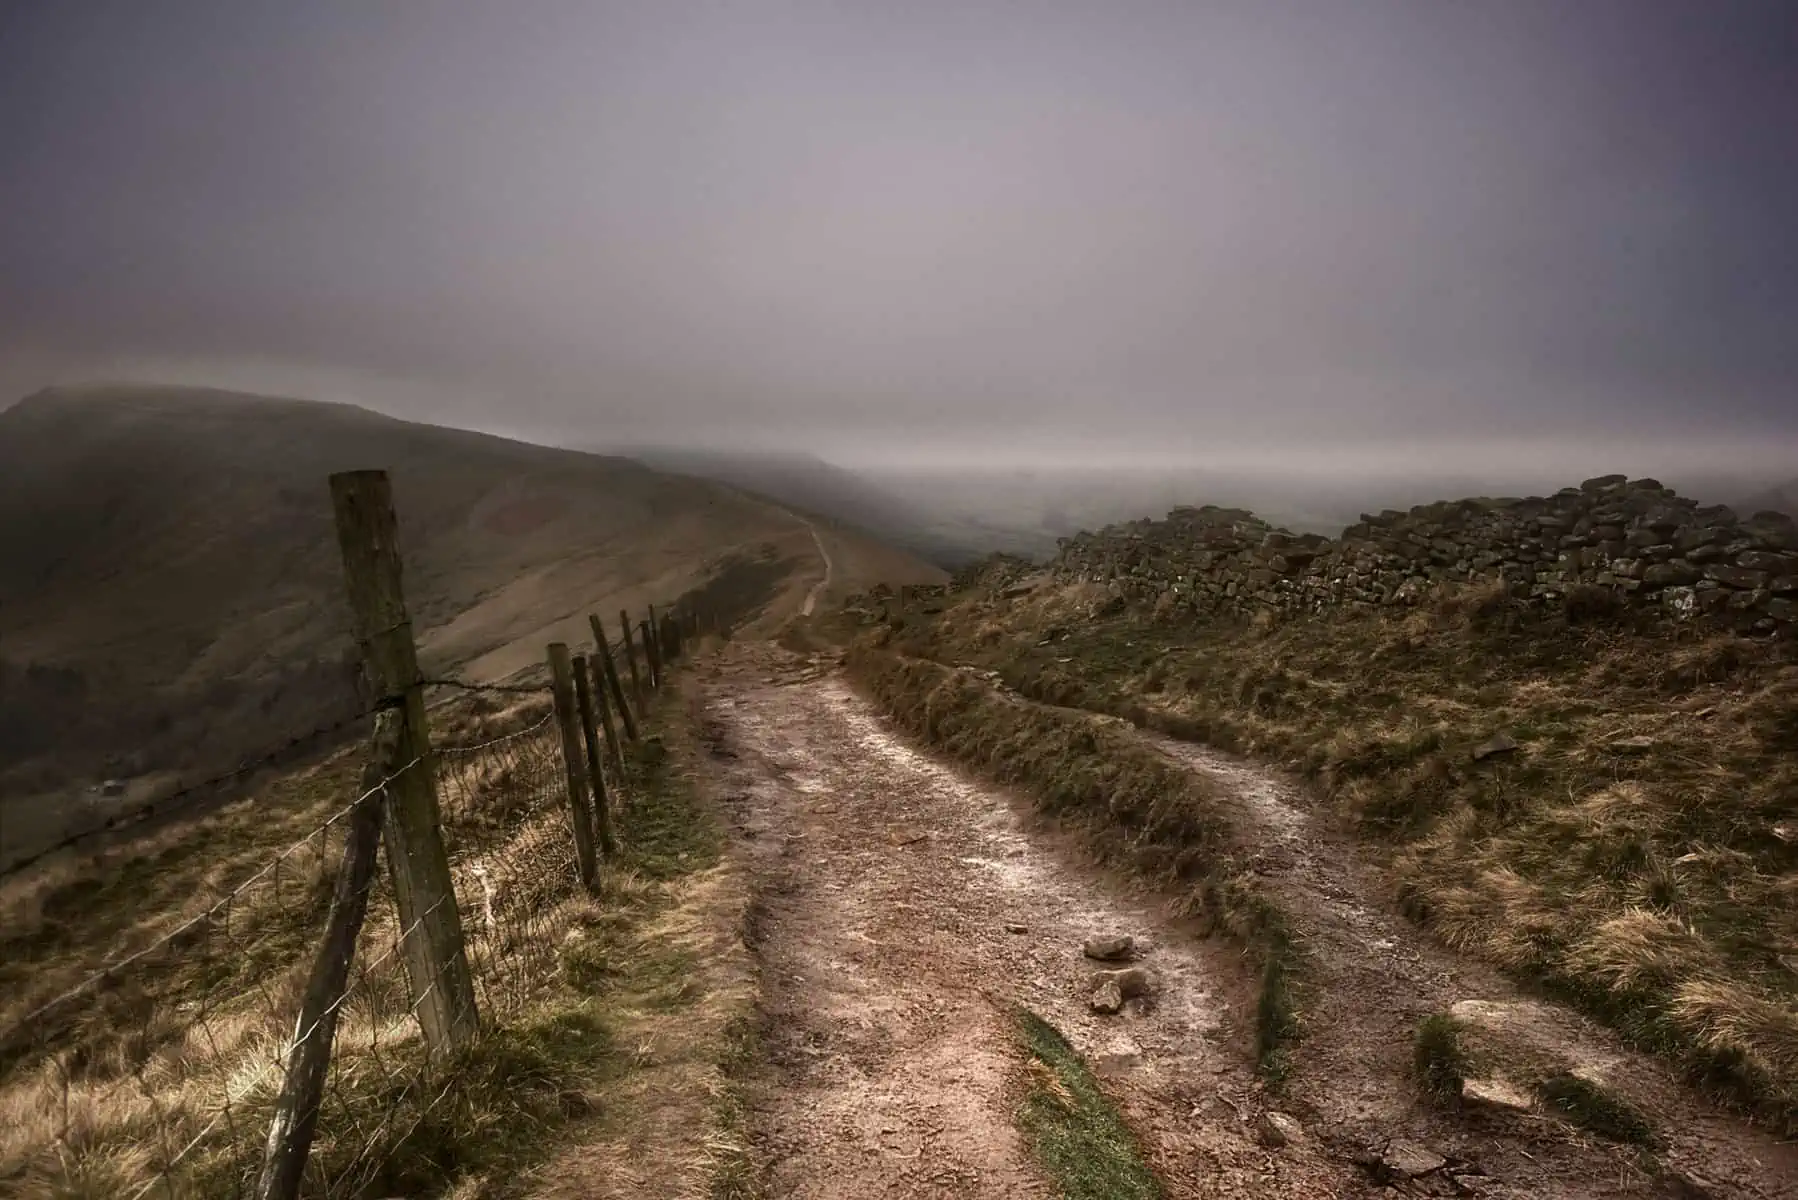 ID: A landscape image. A dark scene shows a dark and stormy day which looks very dramatic. In the foreground is a marked dirt path which leads to a hill in the distance. There are rocks on the right and a fence on the left. We cannot make out the back of the image due to cloud cover which is thick, heavy and grey.